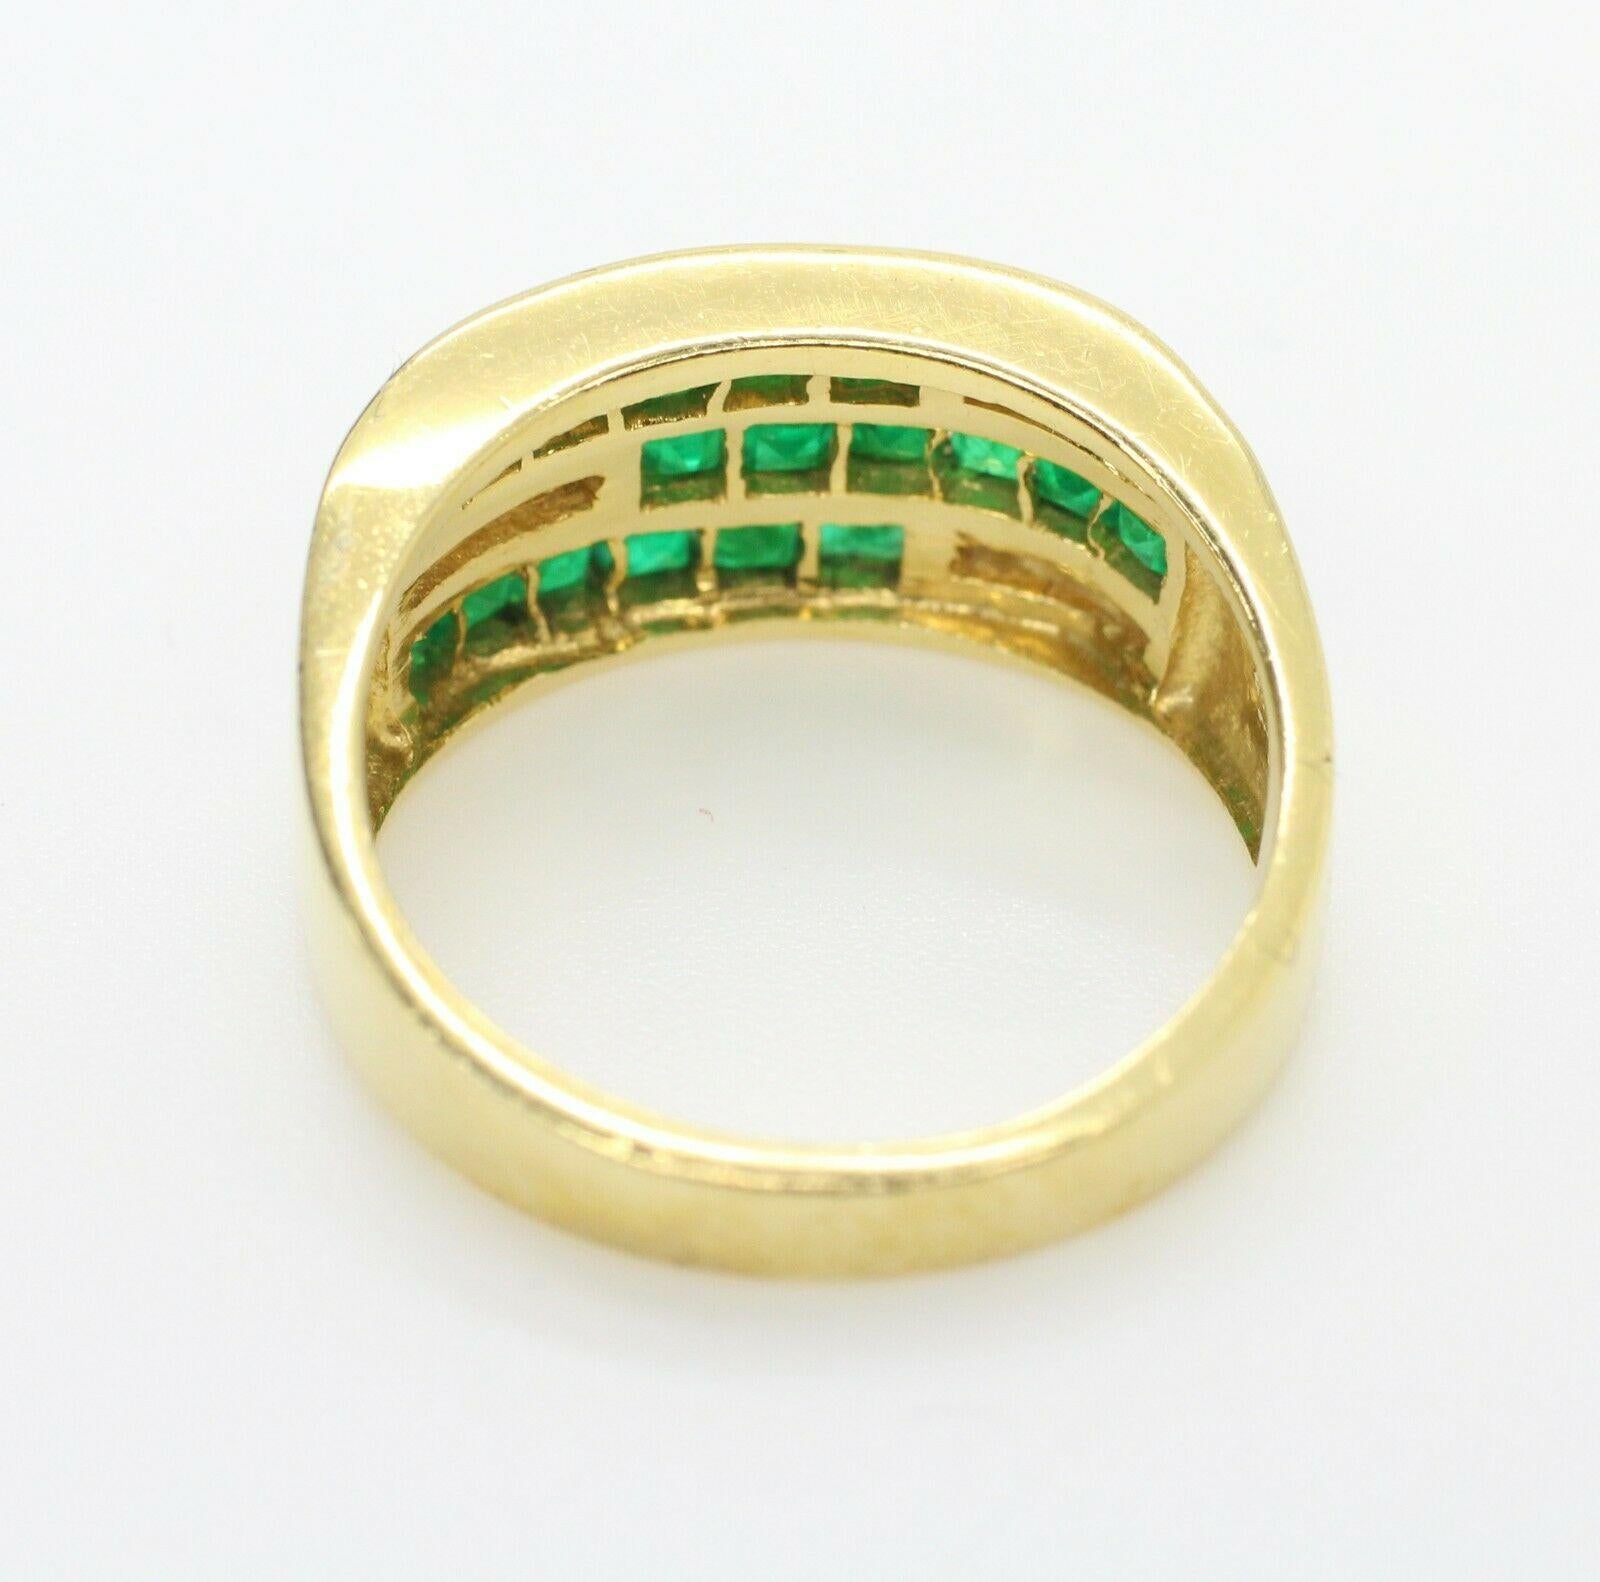 emerald channel ring